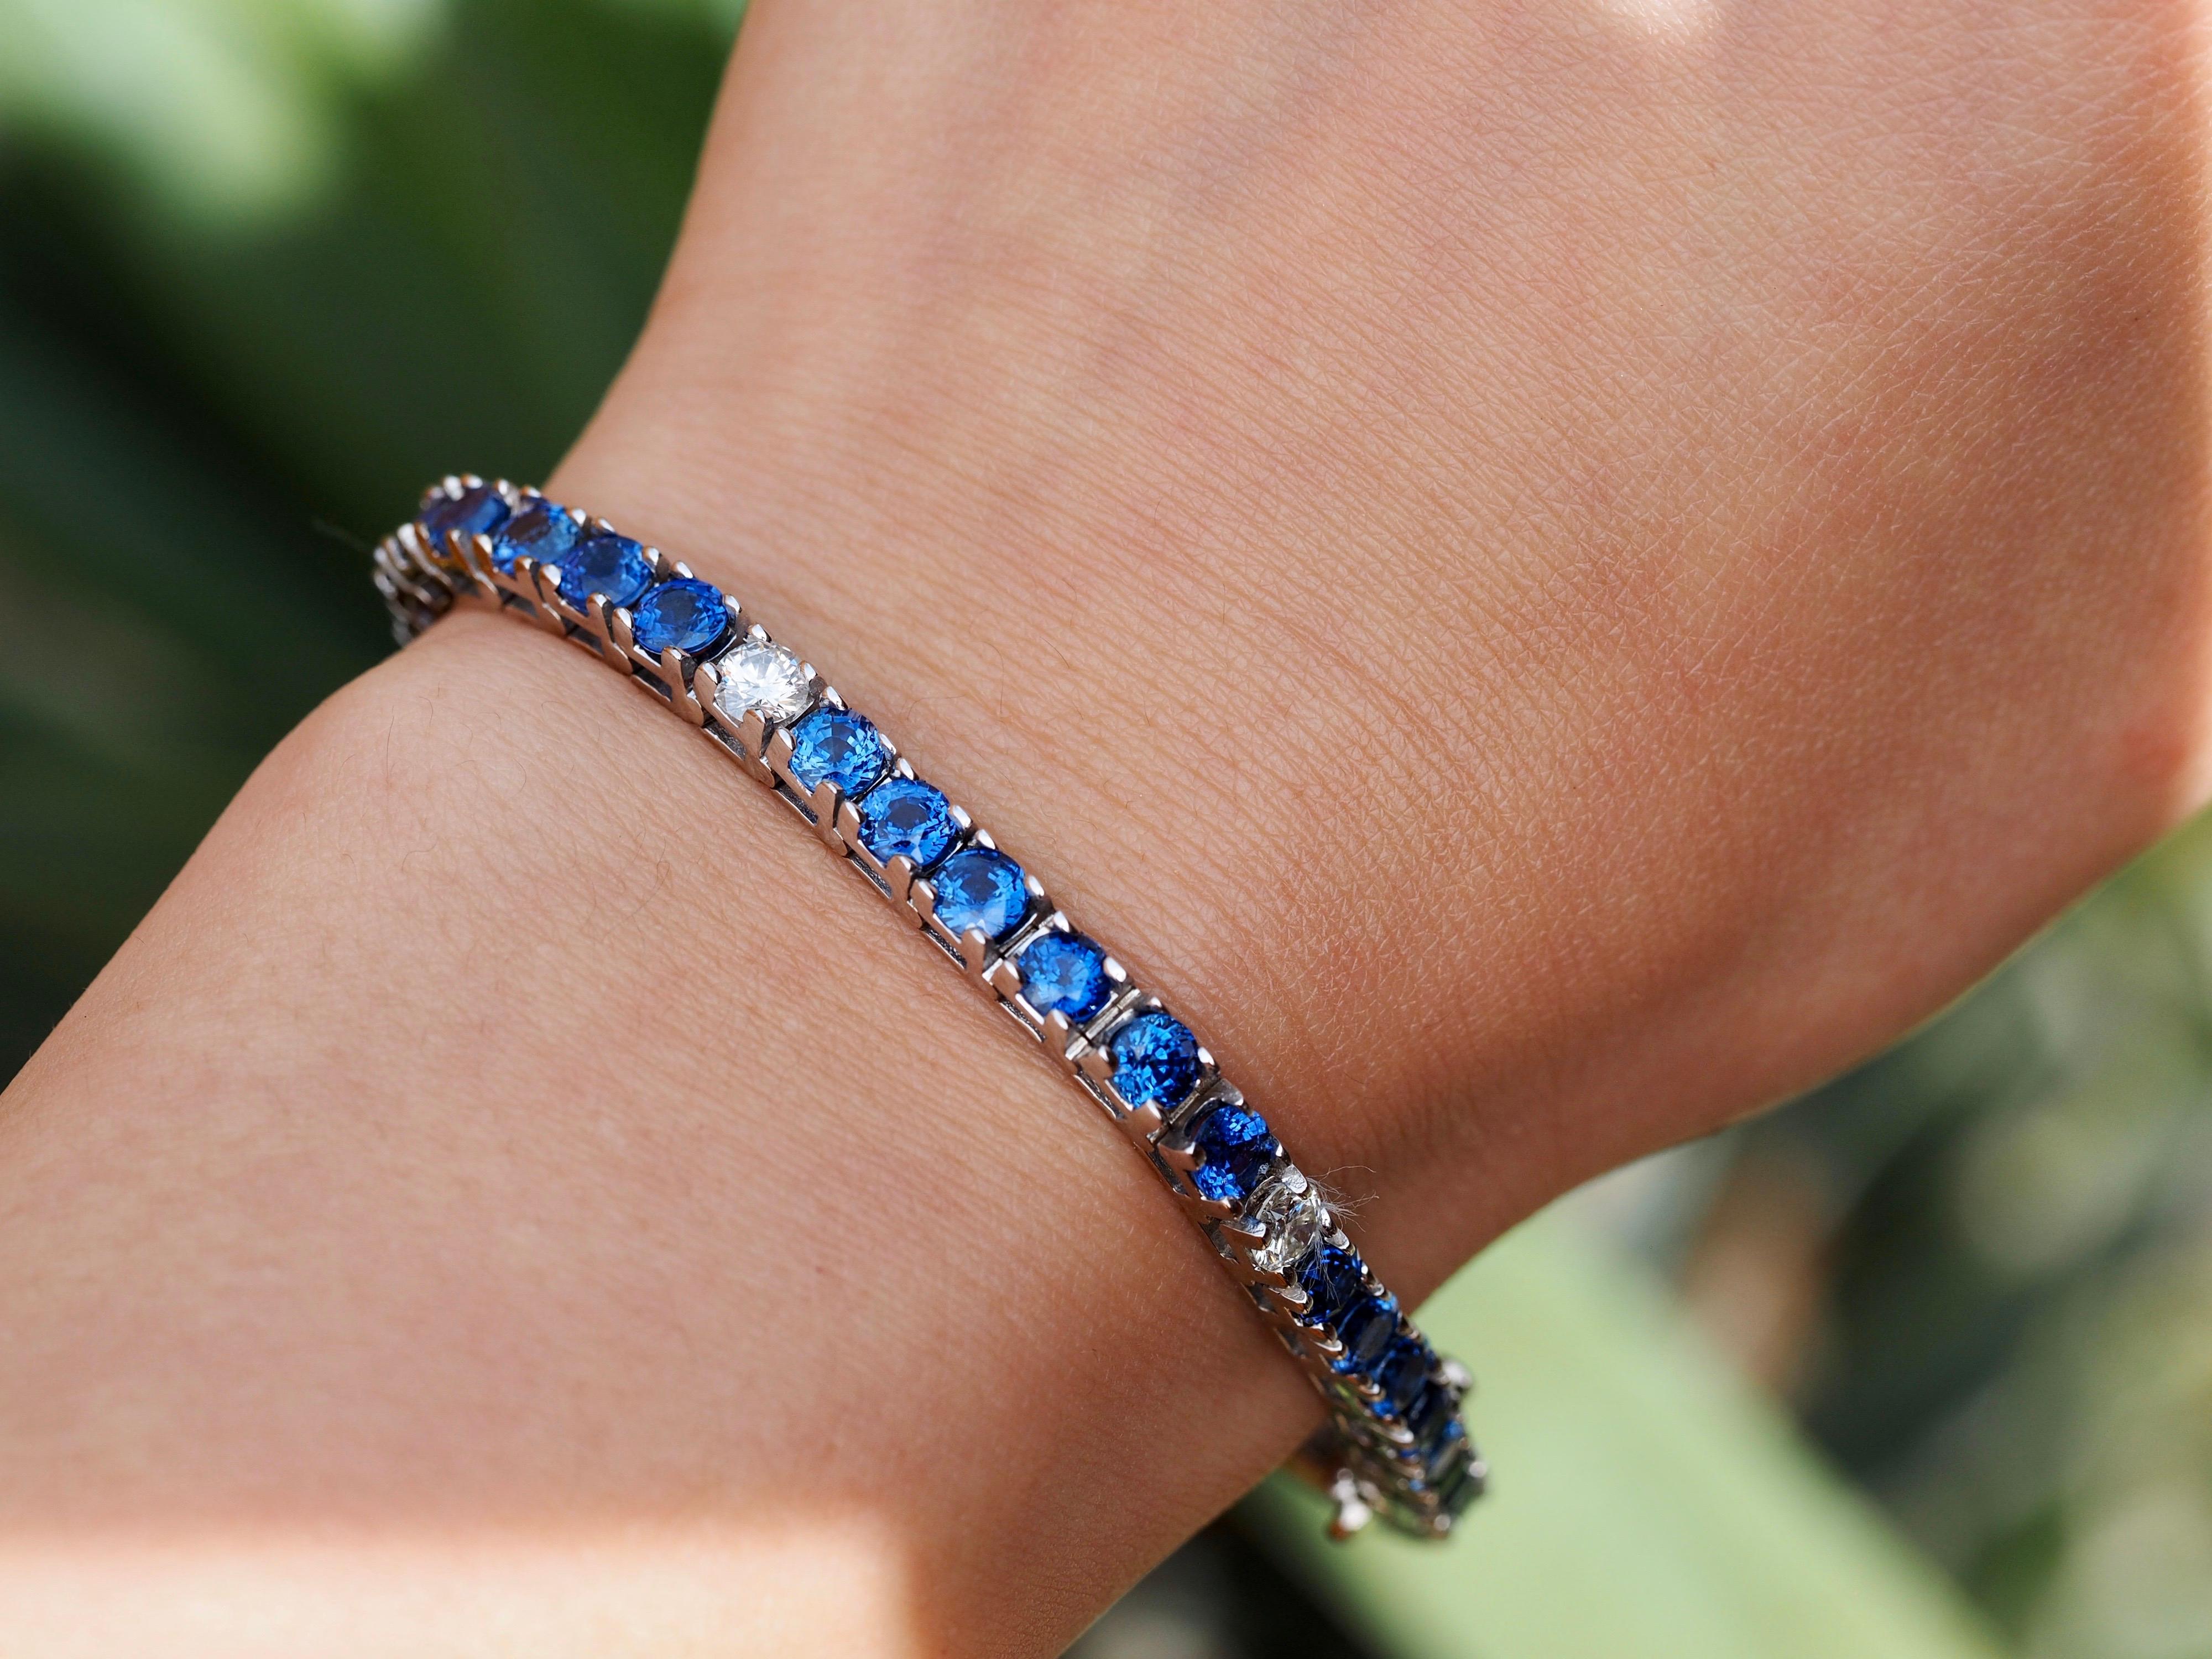 This incredible tennis bracelet is an absolute beauty. It is flowing with 12 carats of round, natural bright blue sapphires alternating with round brilliant diamonds in-between every sixth sapphire. The bracelet is made of 14- karat white gold and